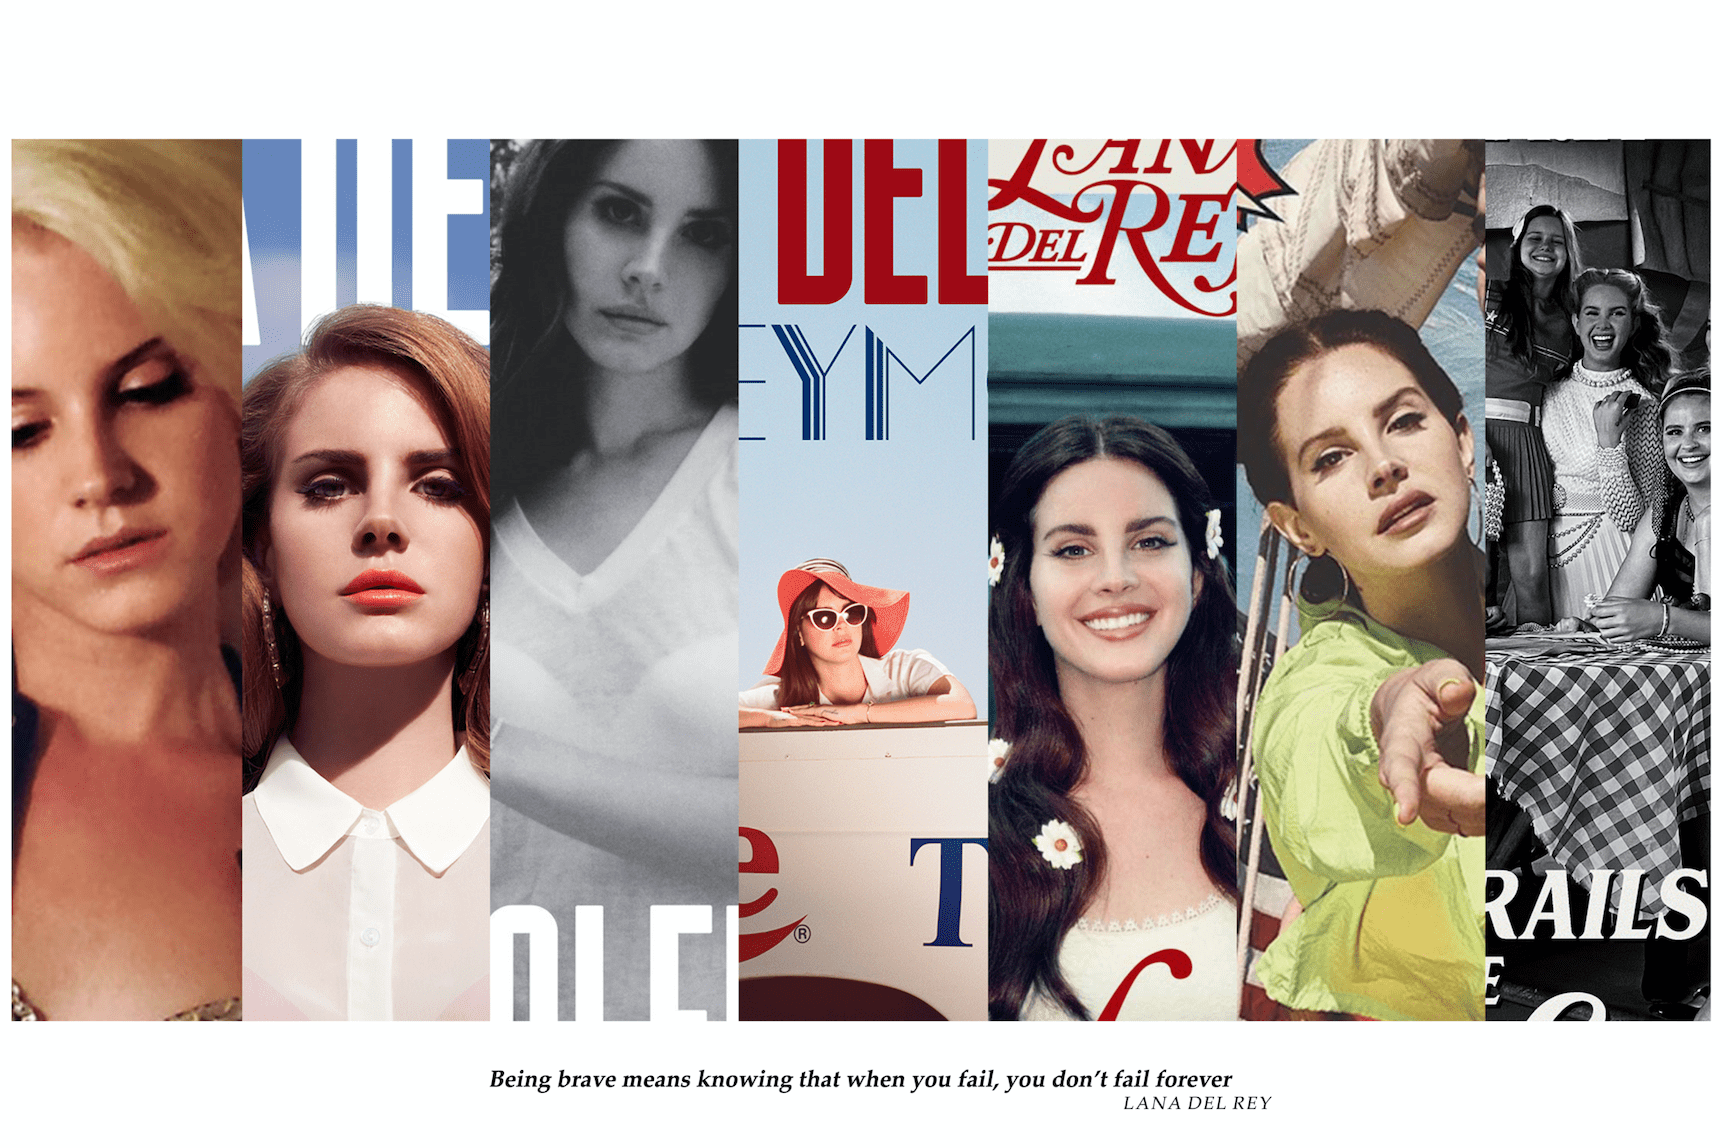 The collage includes images of the following women: Yvonne De Carlo, Ann-Margret, Jane Fonda, and Lana Del Rey. - Lana Del Rey